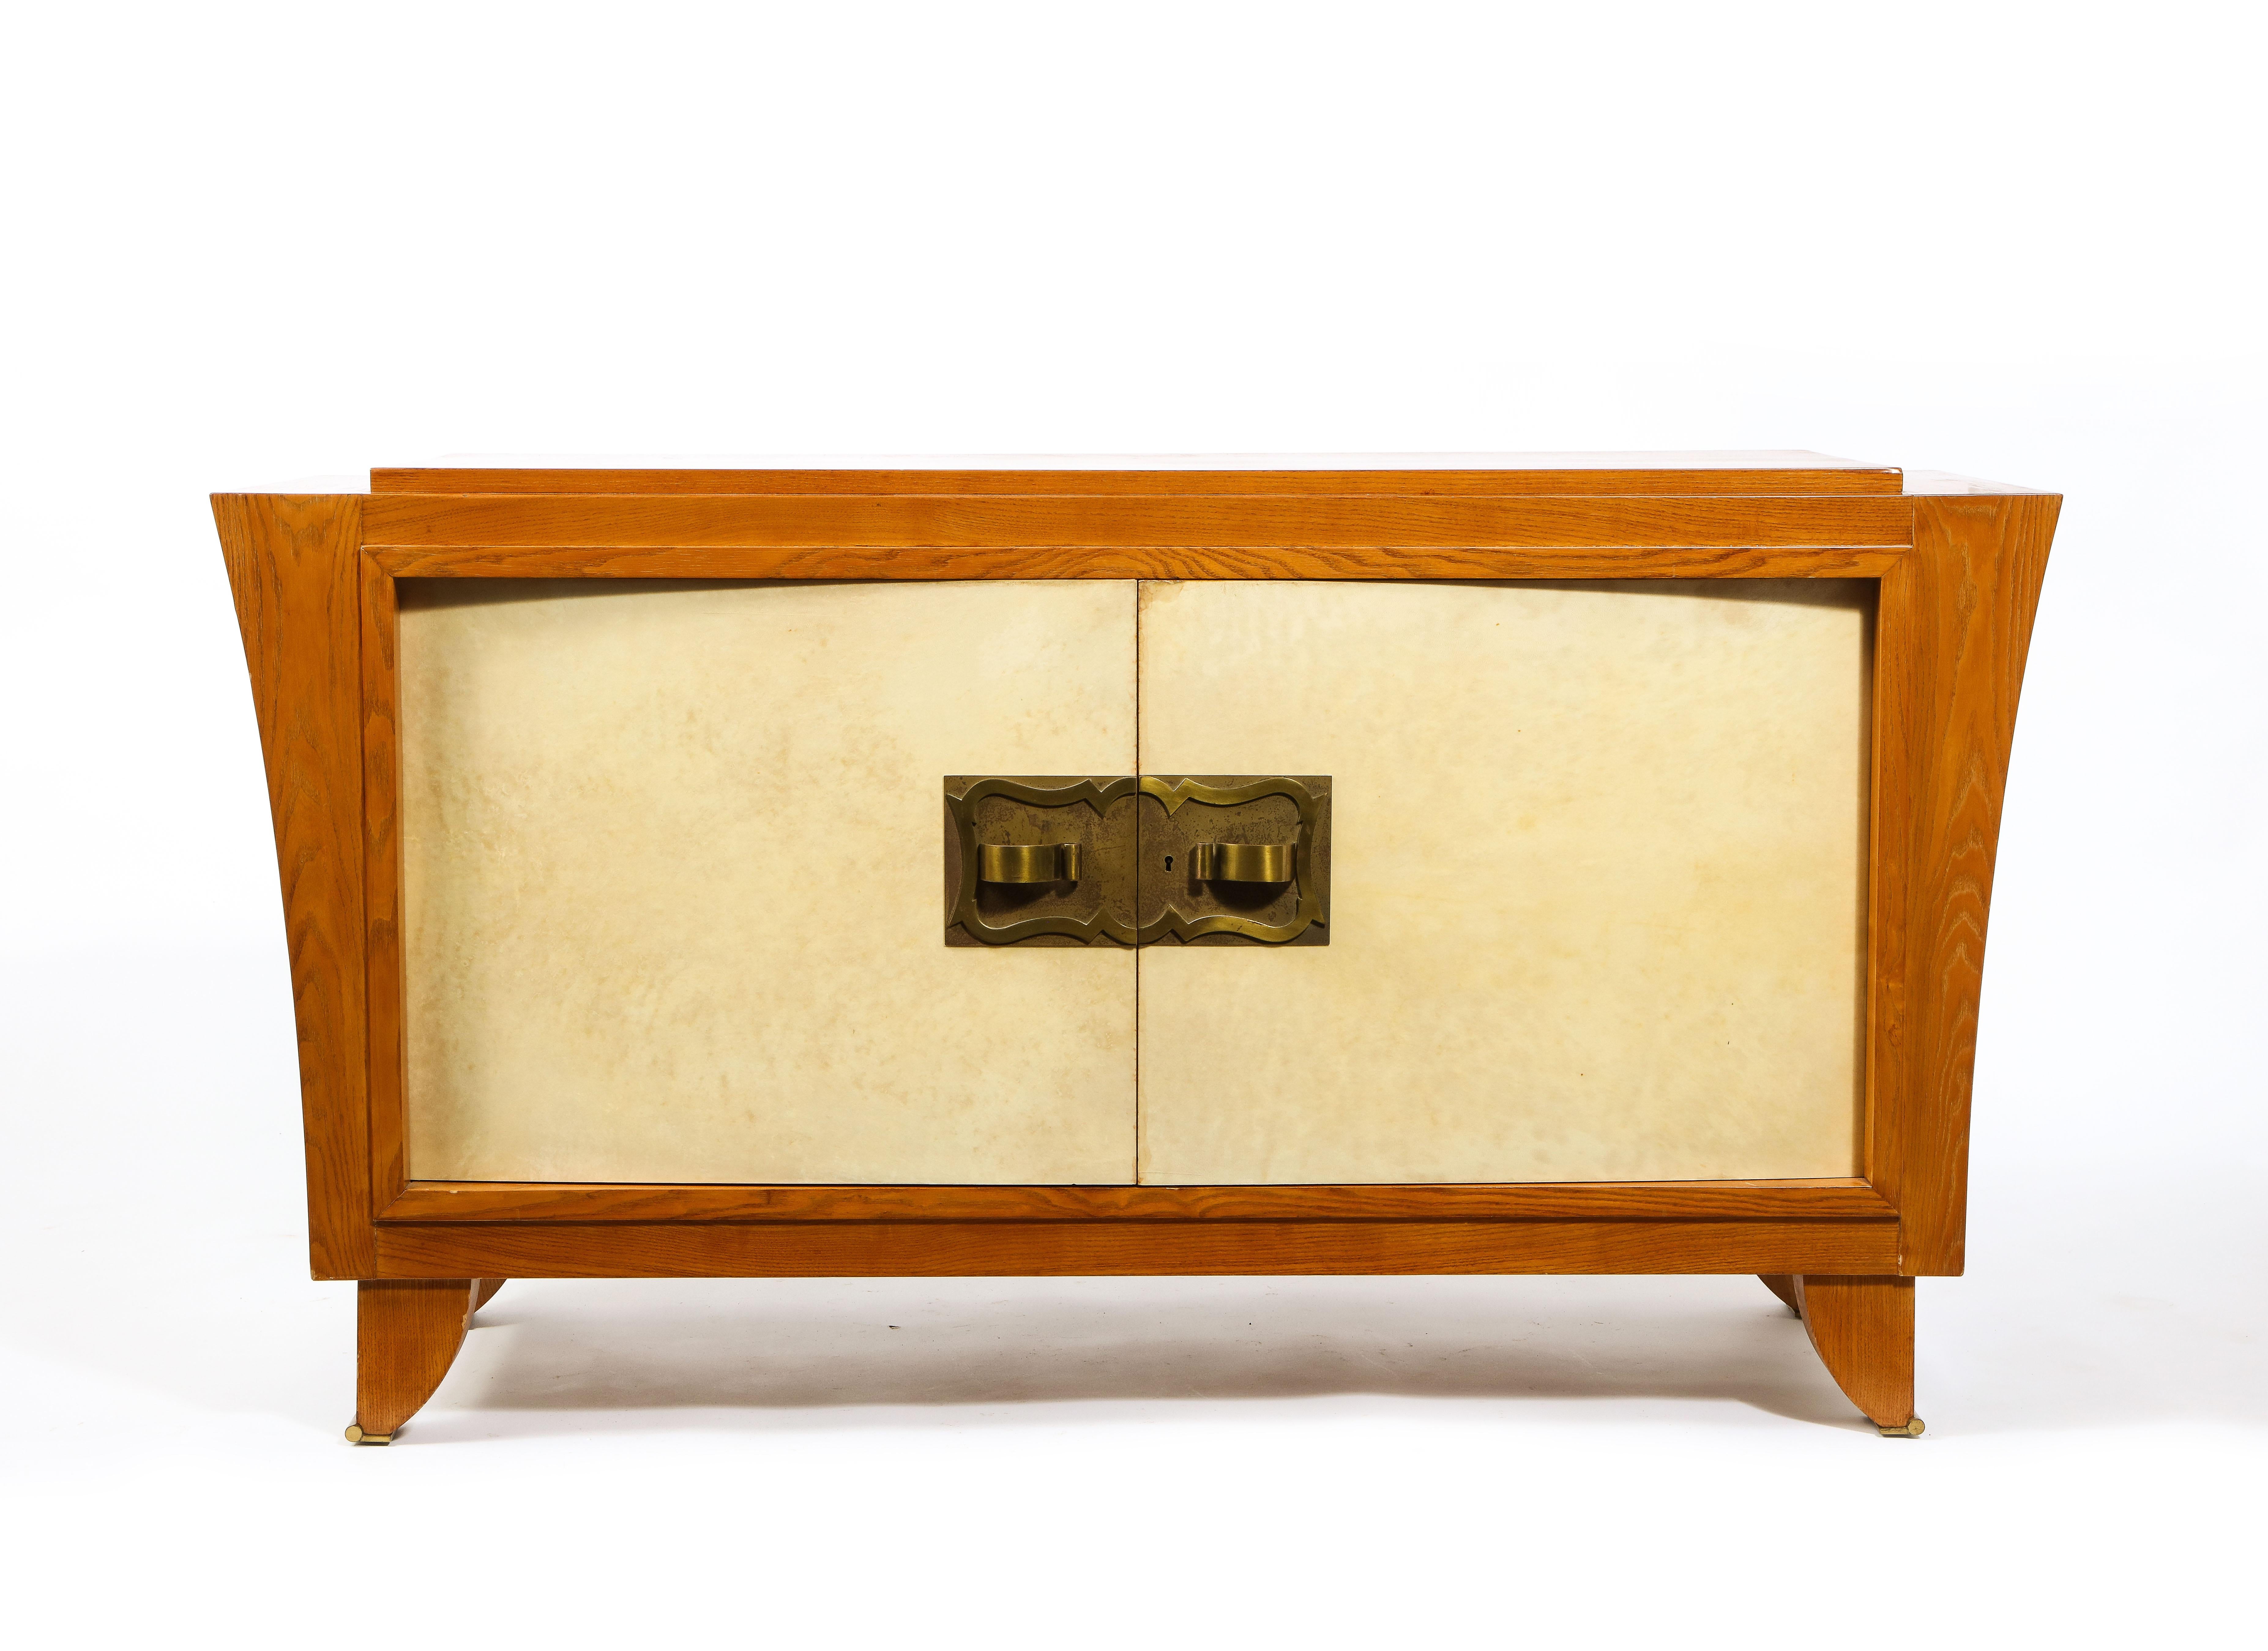 Elegant two-door parchment & oak cabinet with bronze hardware. The sides flare out as they go upwards and the top is recessed. The body rests on four elegant feet finished with bronze sabots. The narrow long drawers are ideal for storing linens or